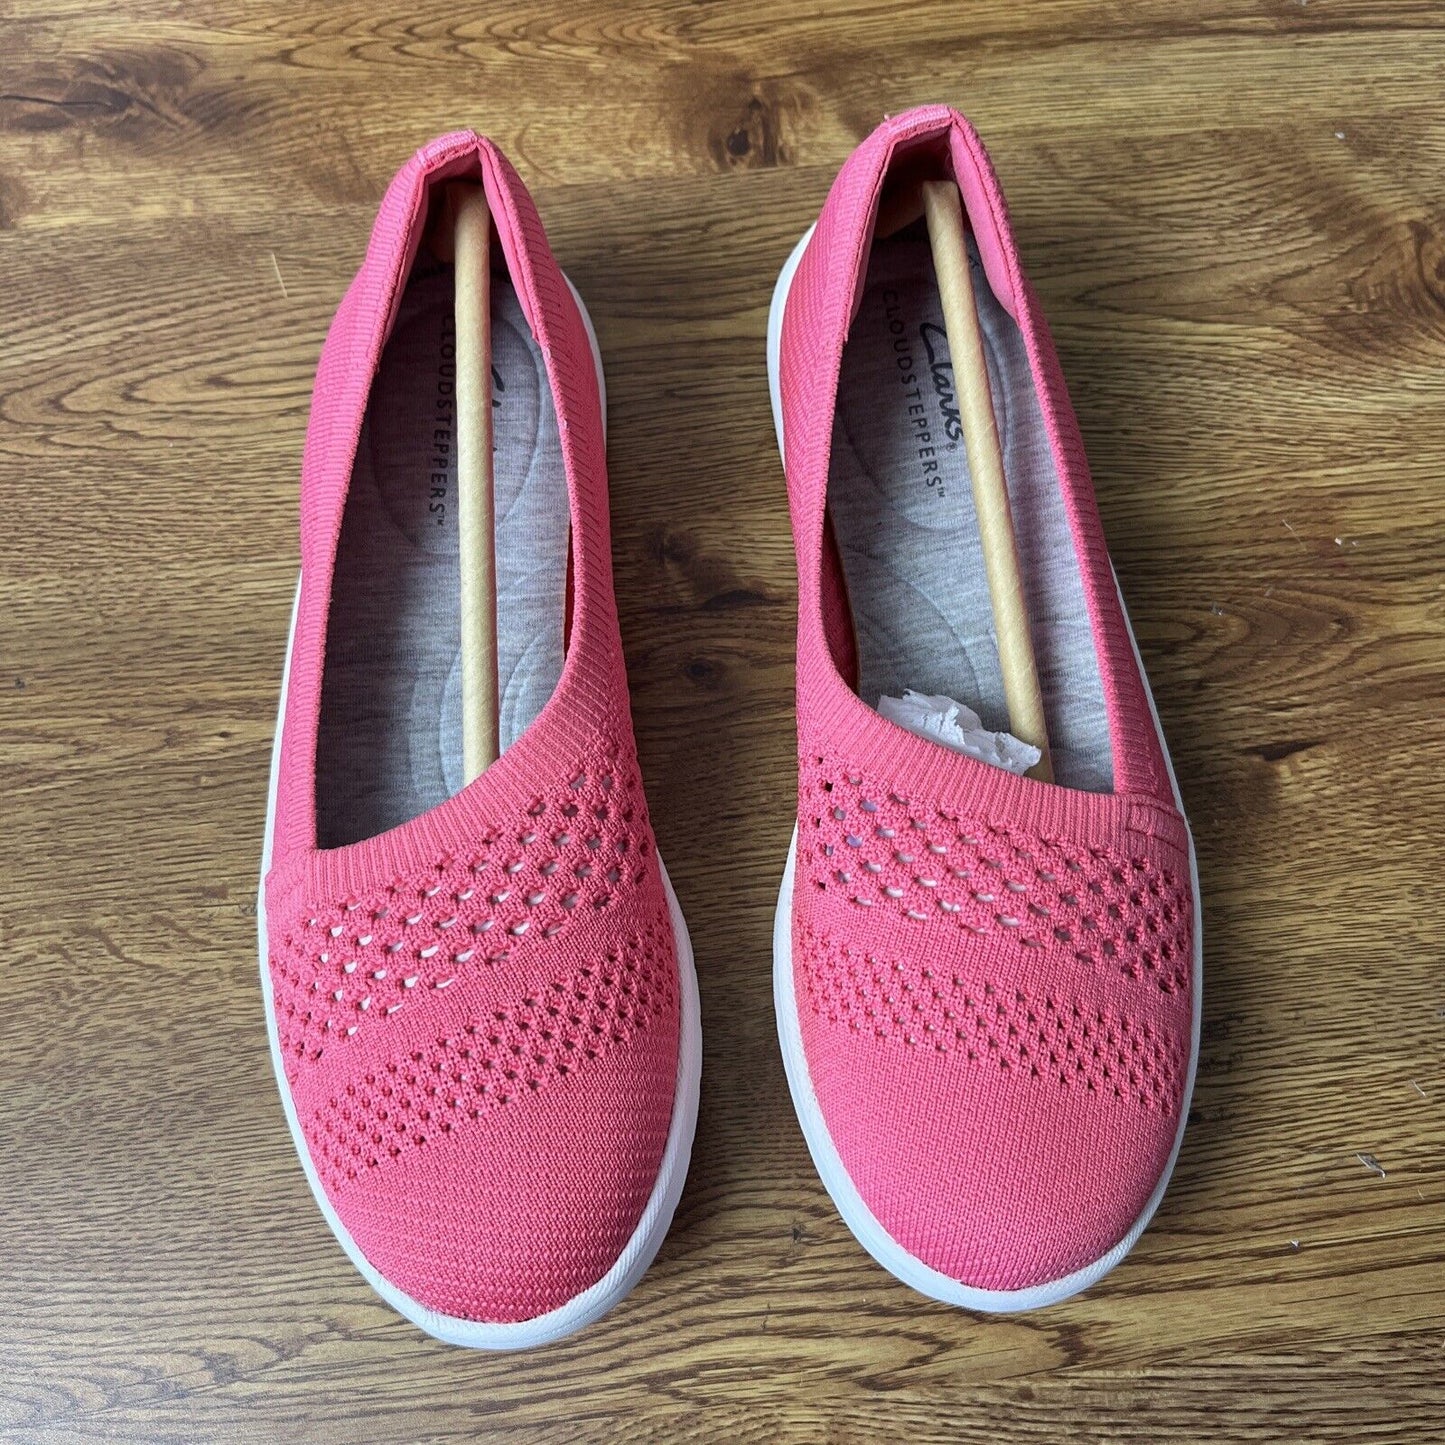 Clarks Cloudsteppers Washable Knit Slip-Ons - Adella Moon-Coral Womens 6.5 M NEW